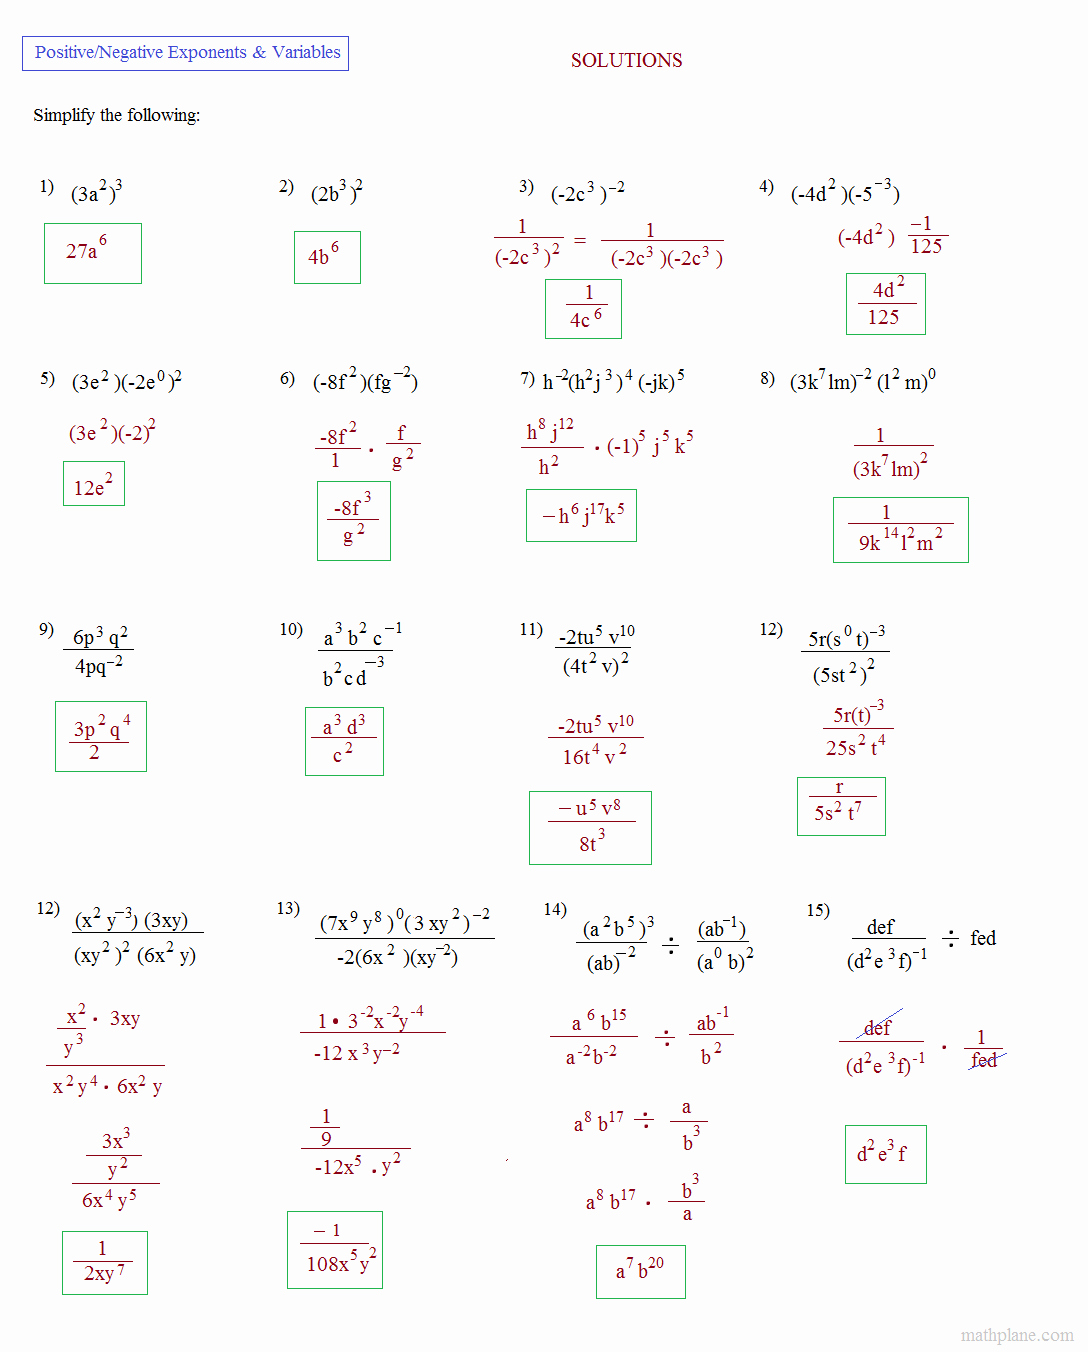 Simplify Exponential Expressions Worksheet Awesome Math Plane Simplifying Negative Exponents and Variables